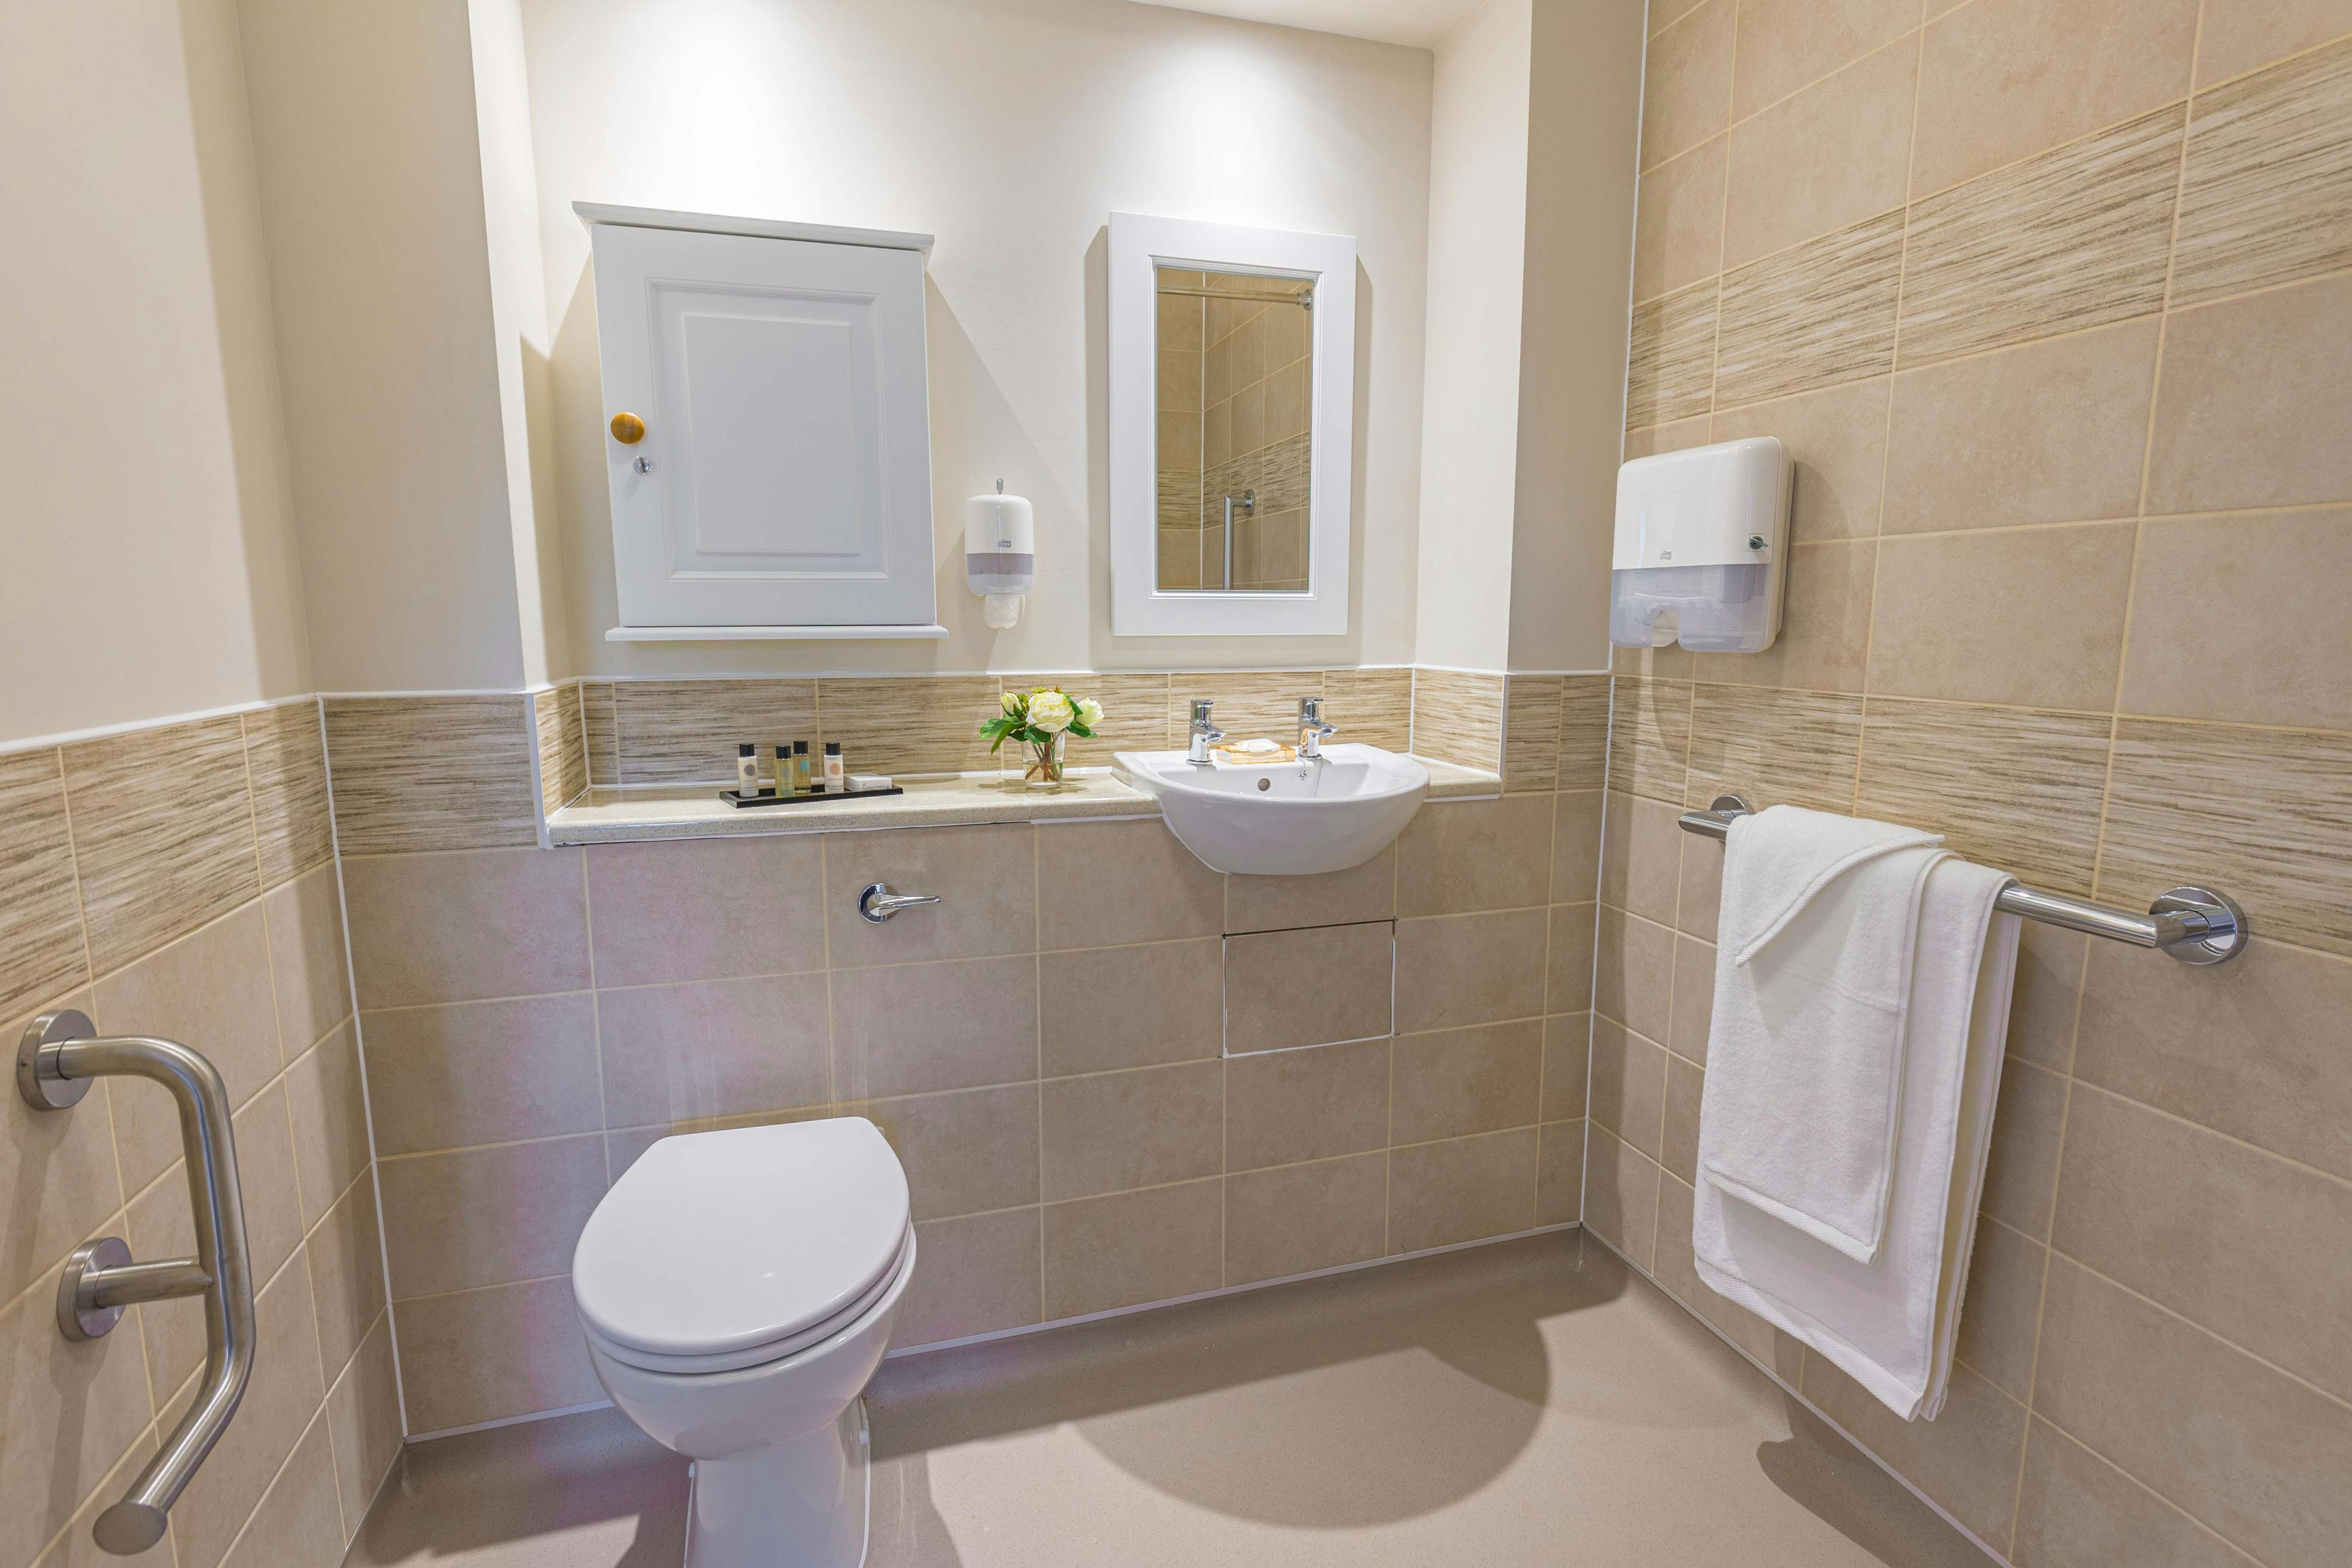 Bathroom at Elgar Court Care Home in Malvern, Worcestershire